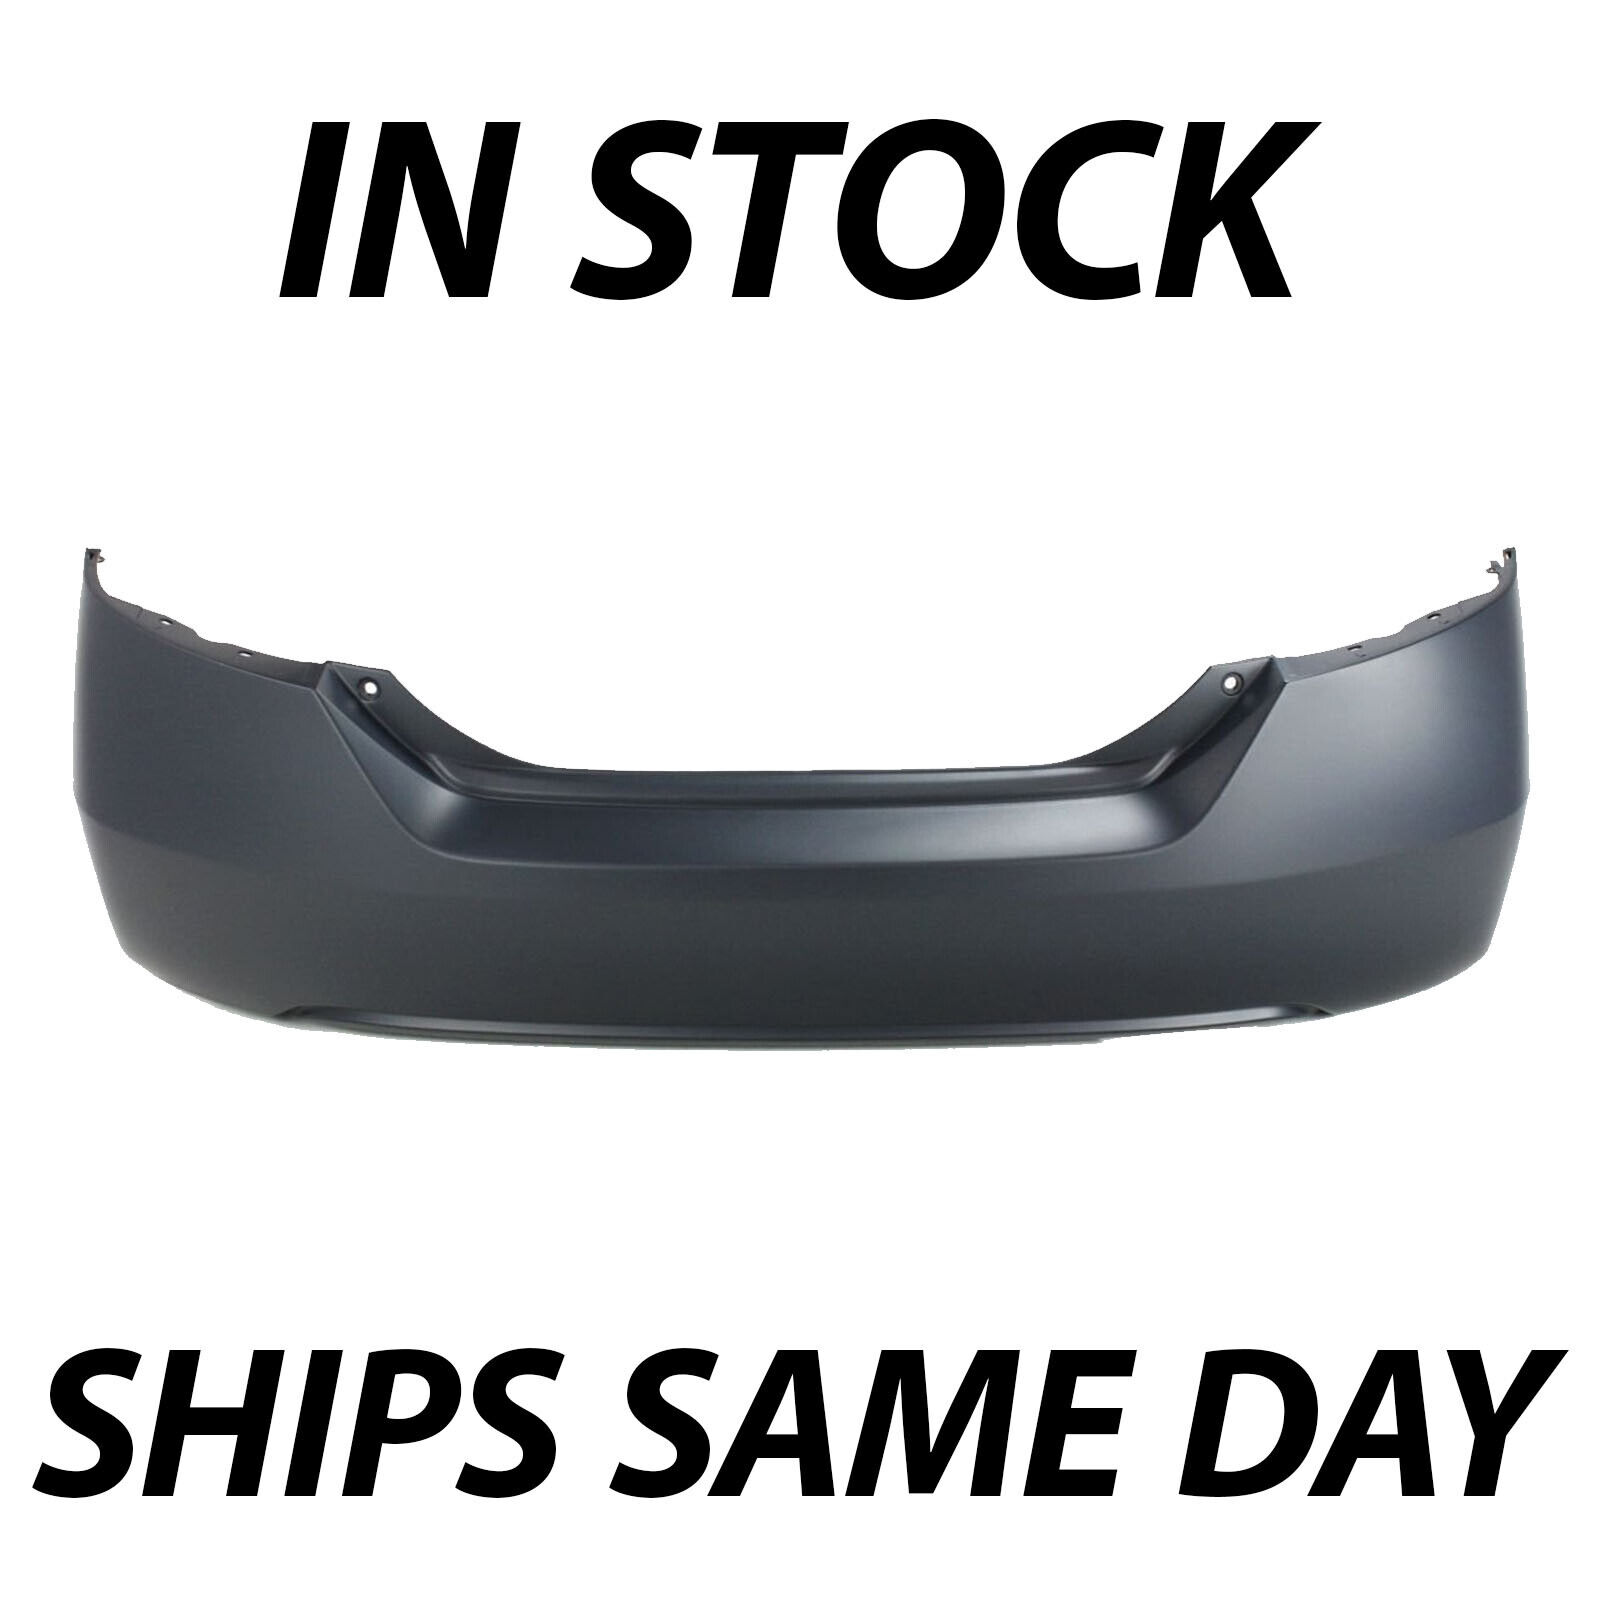 NEW Primered - Rear Bumper Cover Replacement for 2006-2011 Honda Civic Coupe 2Dr